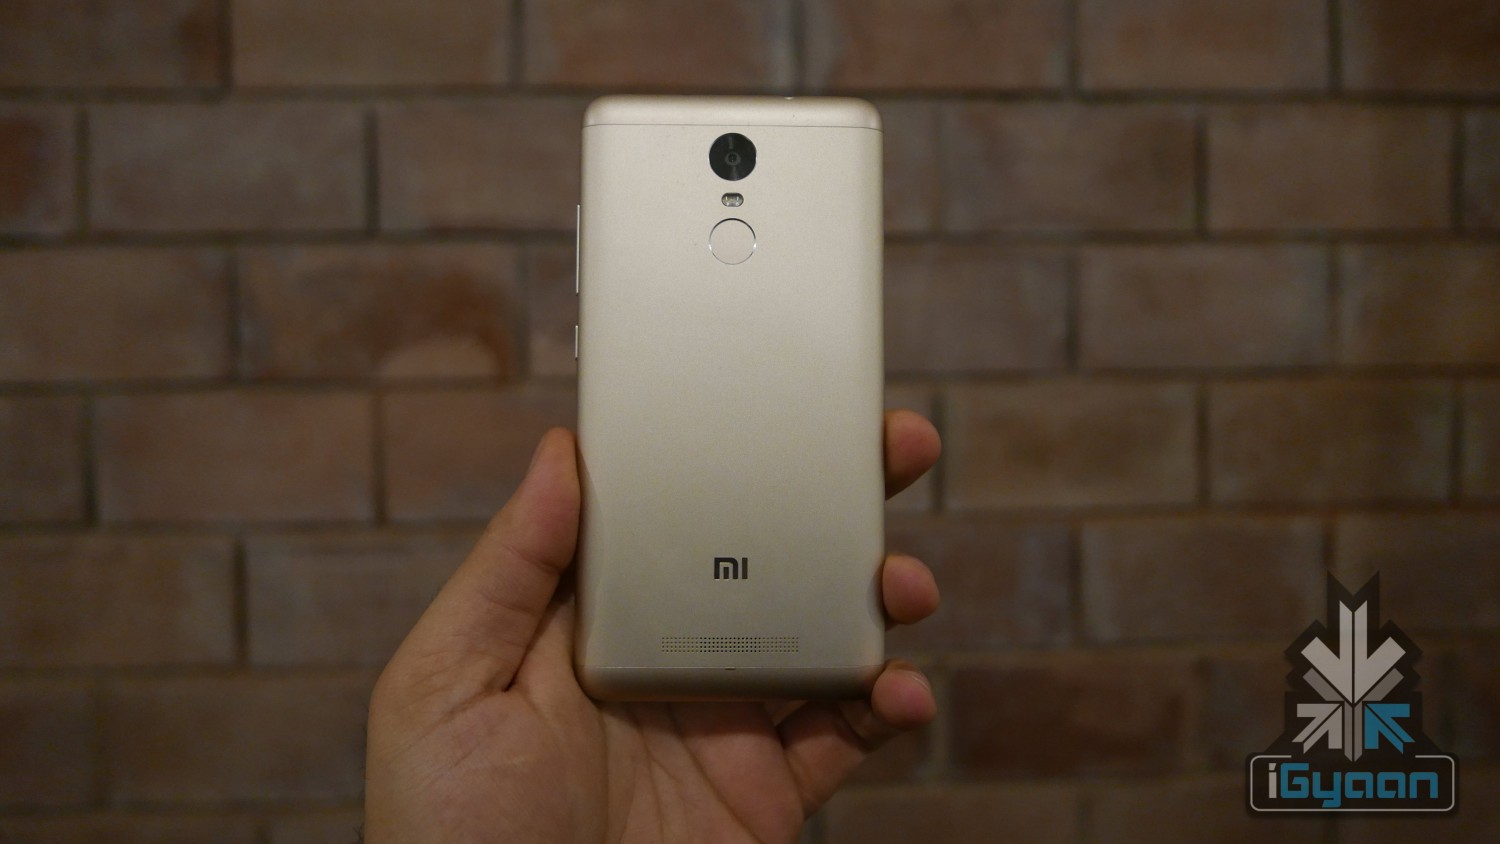 Redmi note 3 igyaan review 4